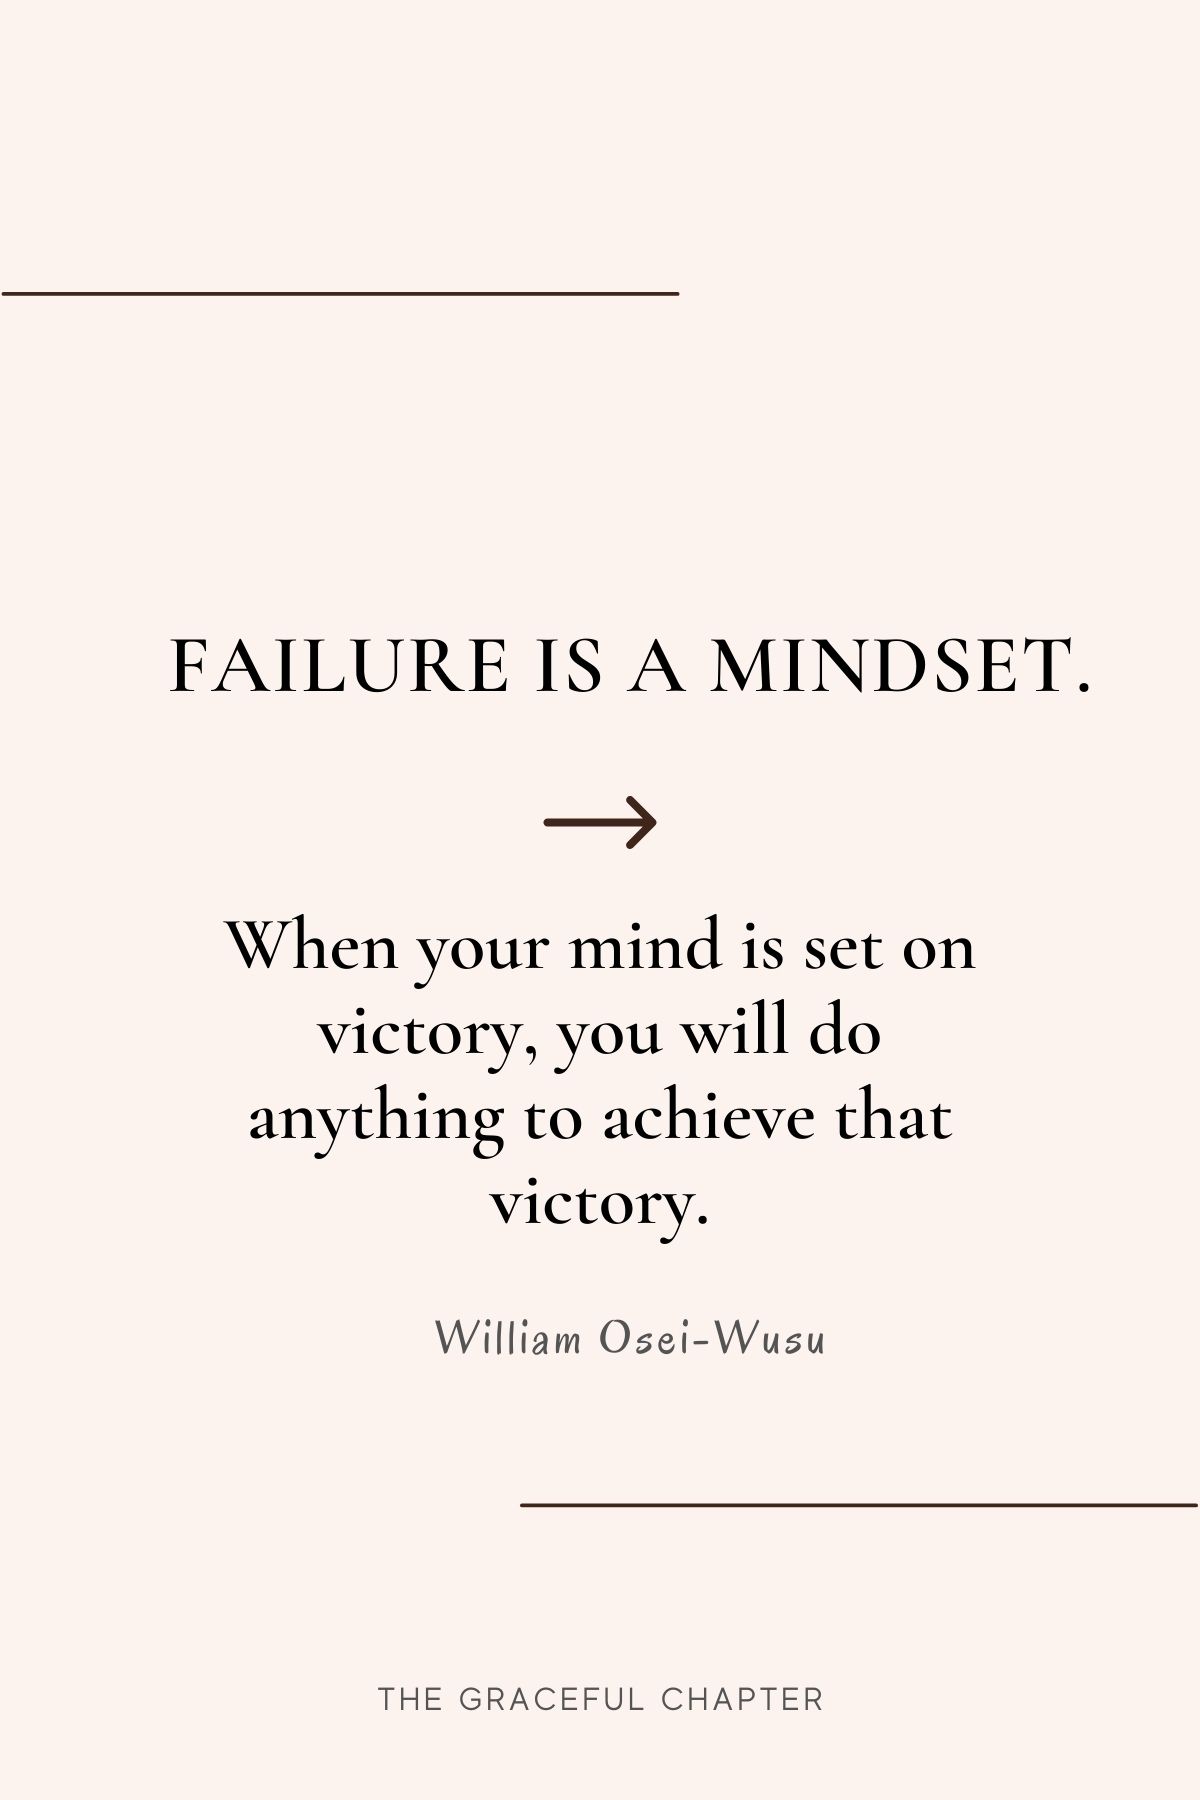 Failure is a mindset. When your mind is set on victory, you will do anything to achieve that victory.